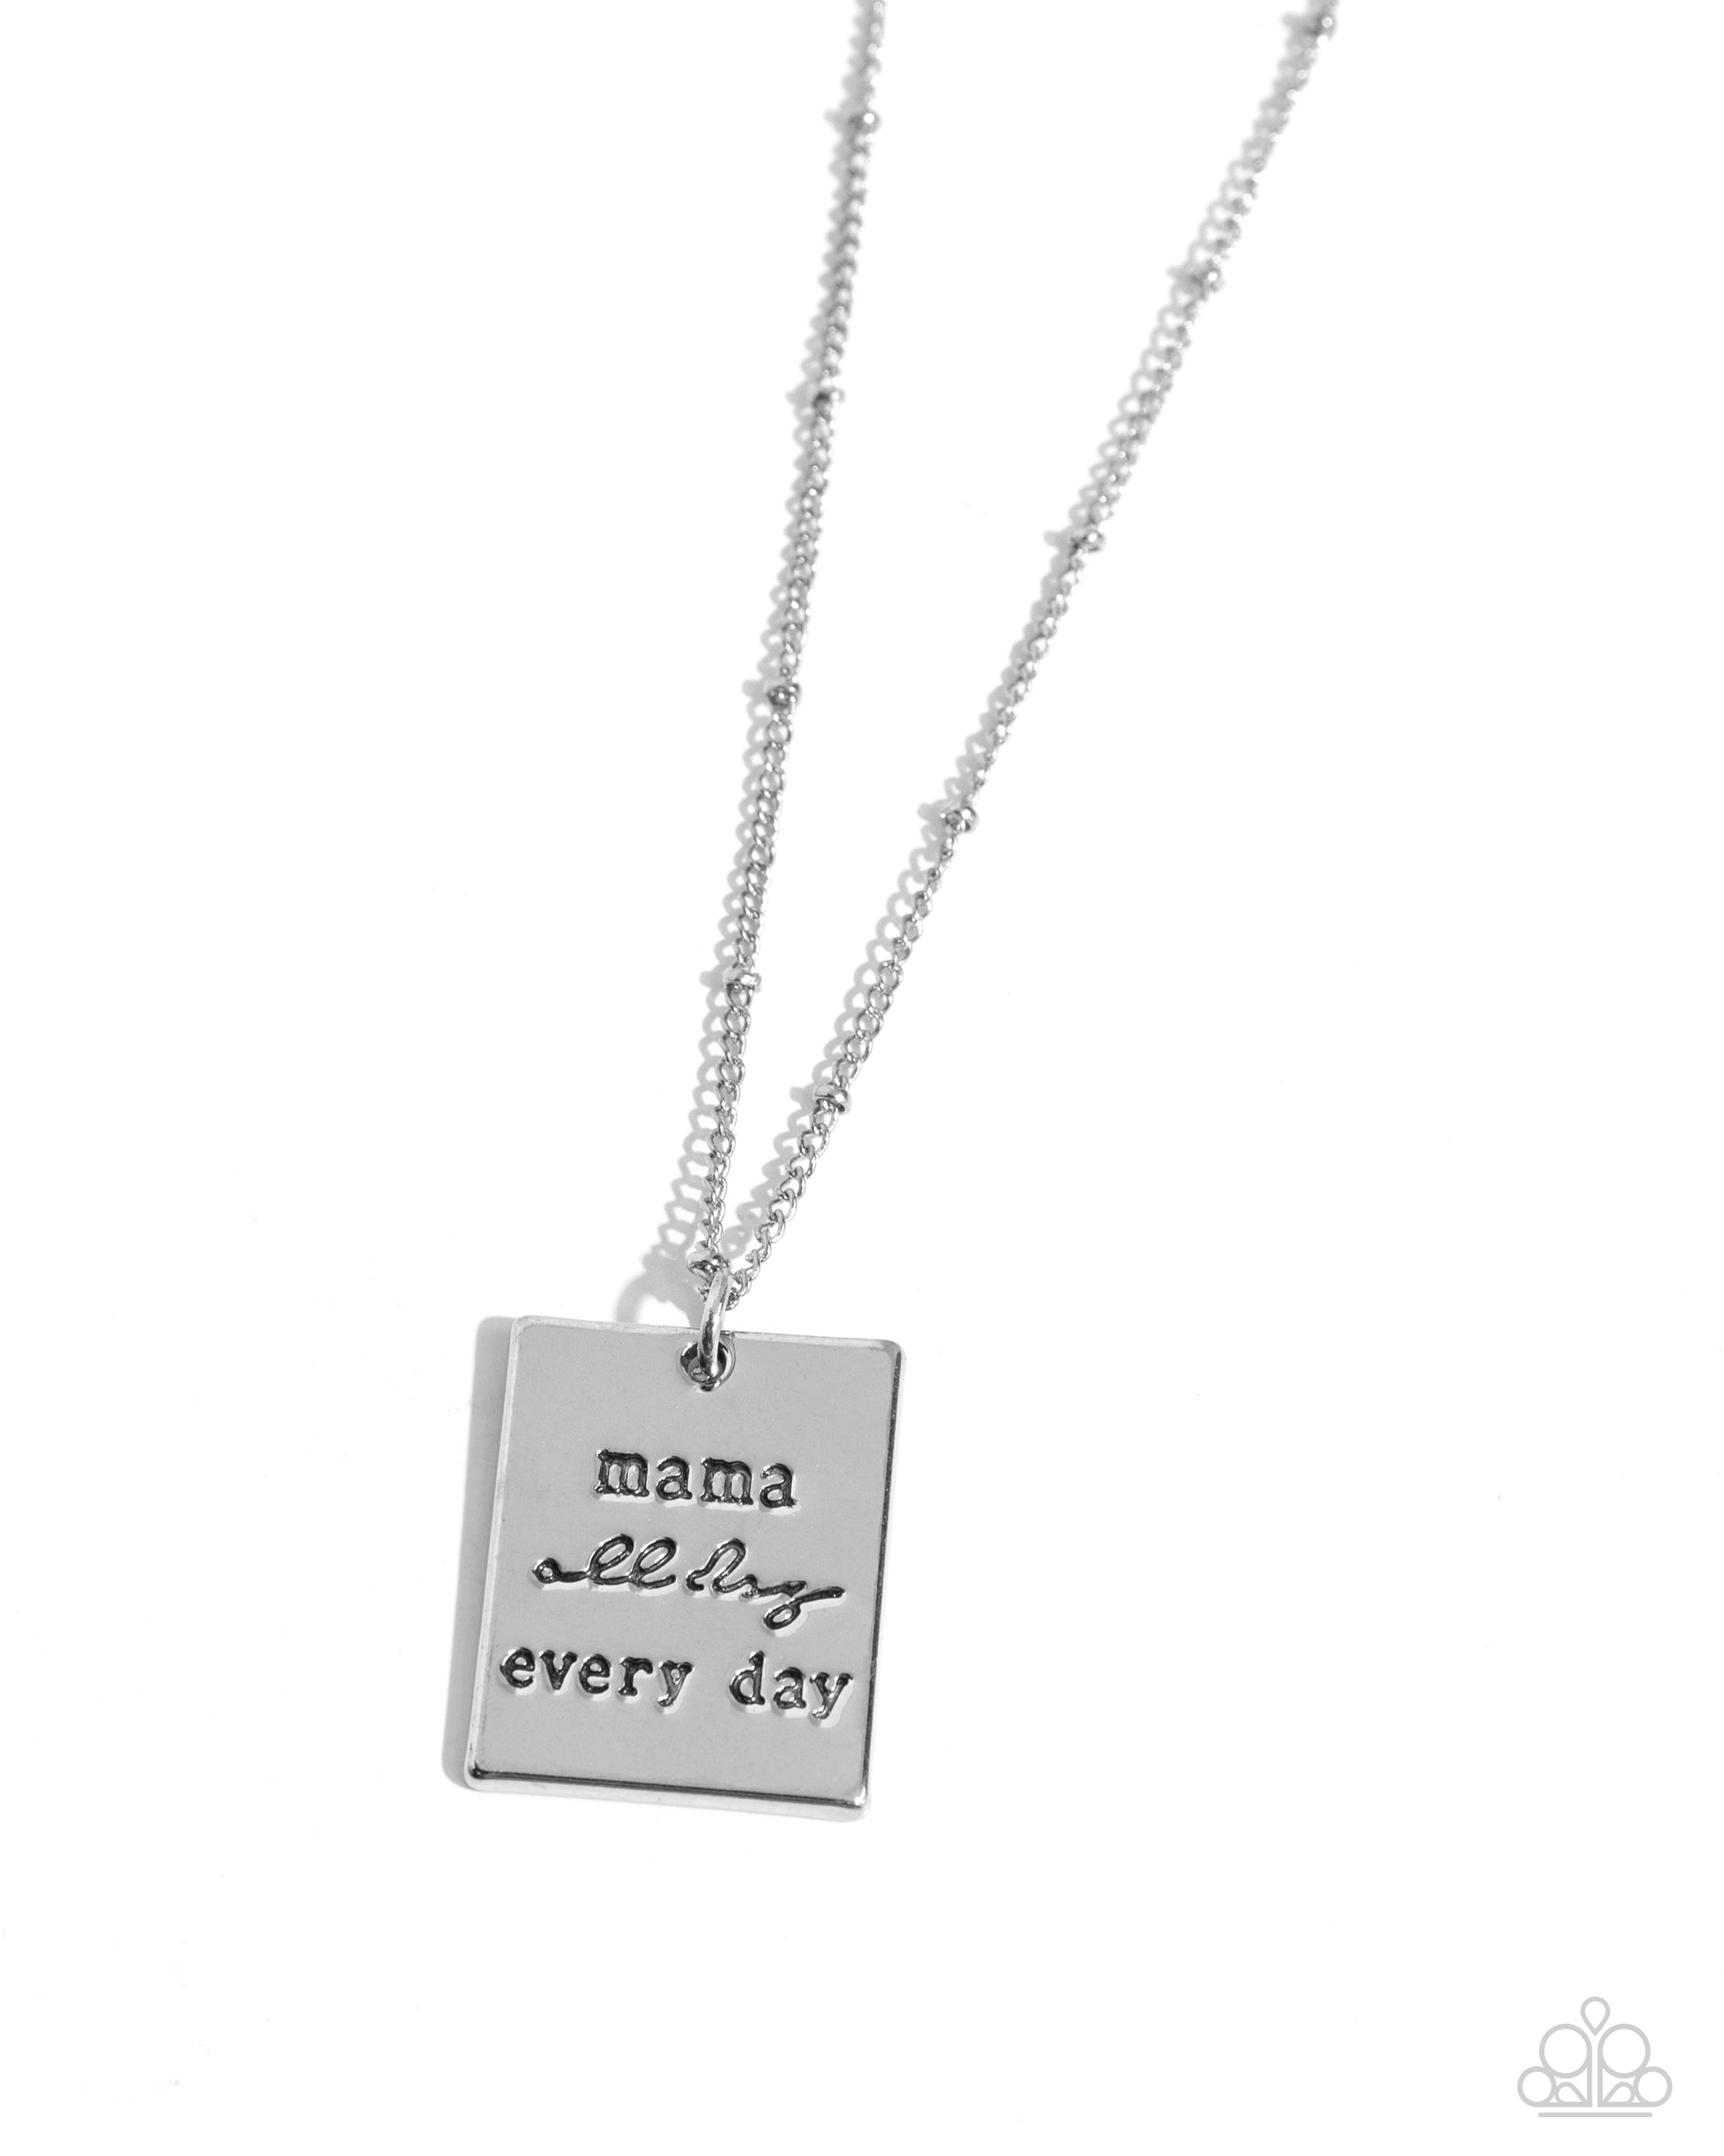 <p>Infused with dainty silver studs on a dainty silver chain, a silver rectangular plate is stamped with the phrase "mama all day every day," for a monochromatic, minimalistic tribute. Features an adjustable clasp closure.</p> <p><i> Sold as one individual necklace. Includes one pair of matching earrings.</i></p>